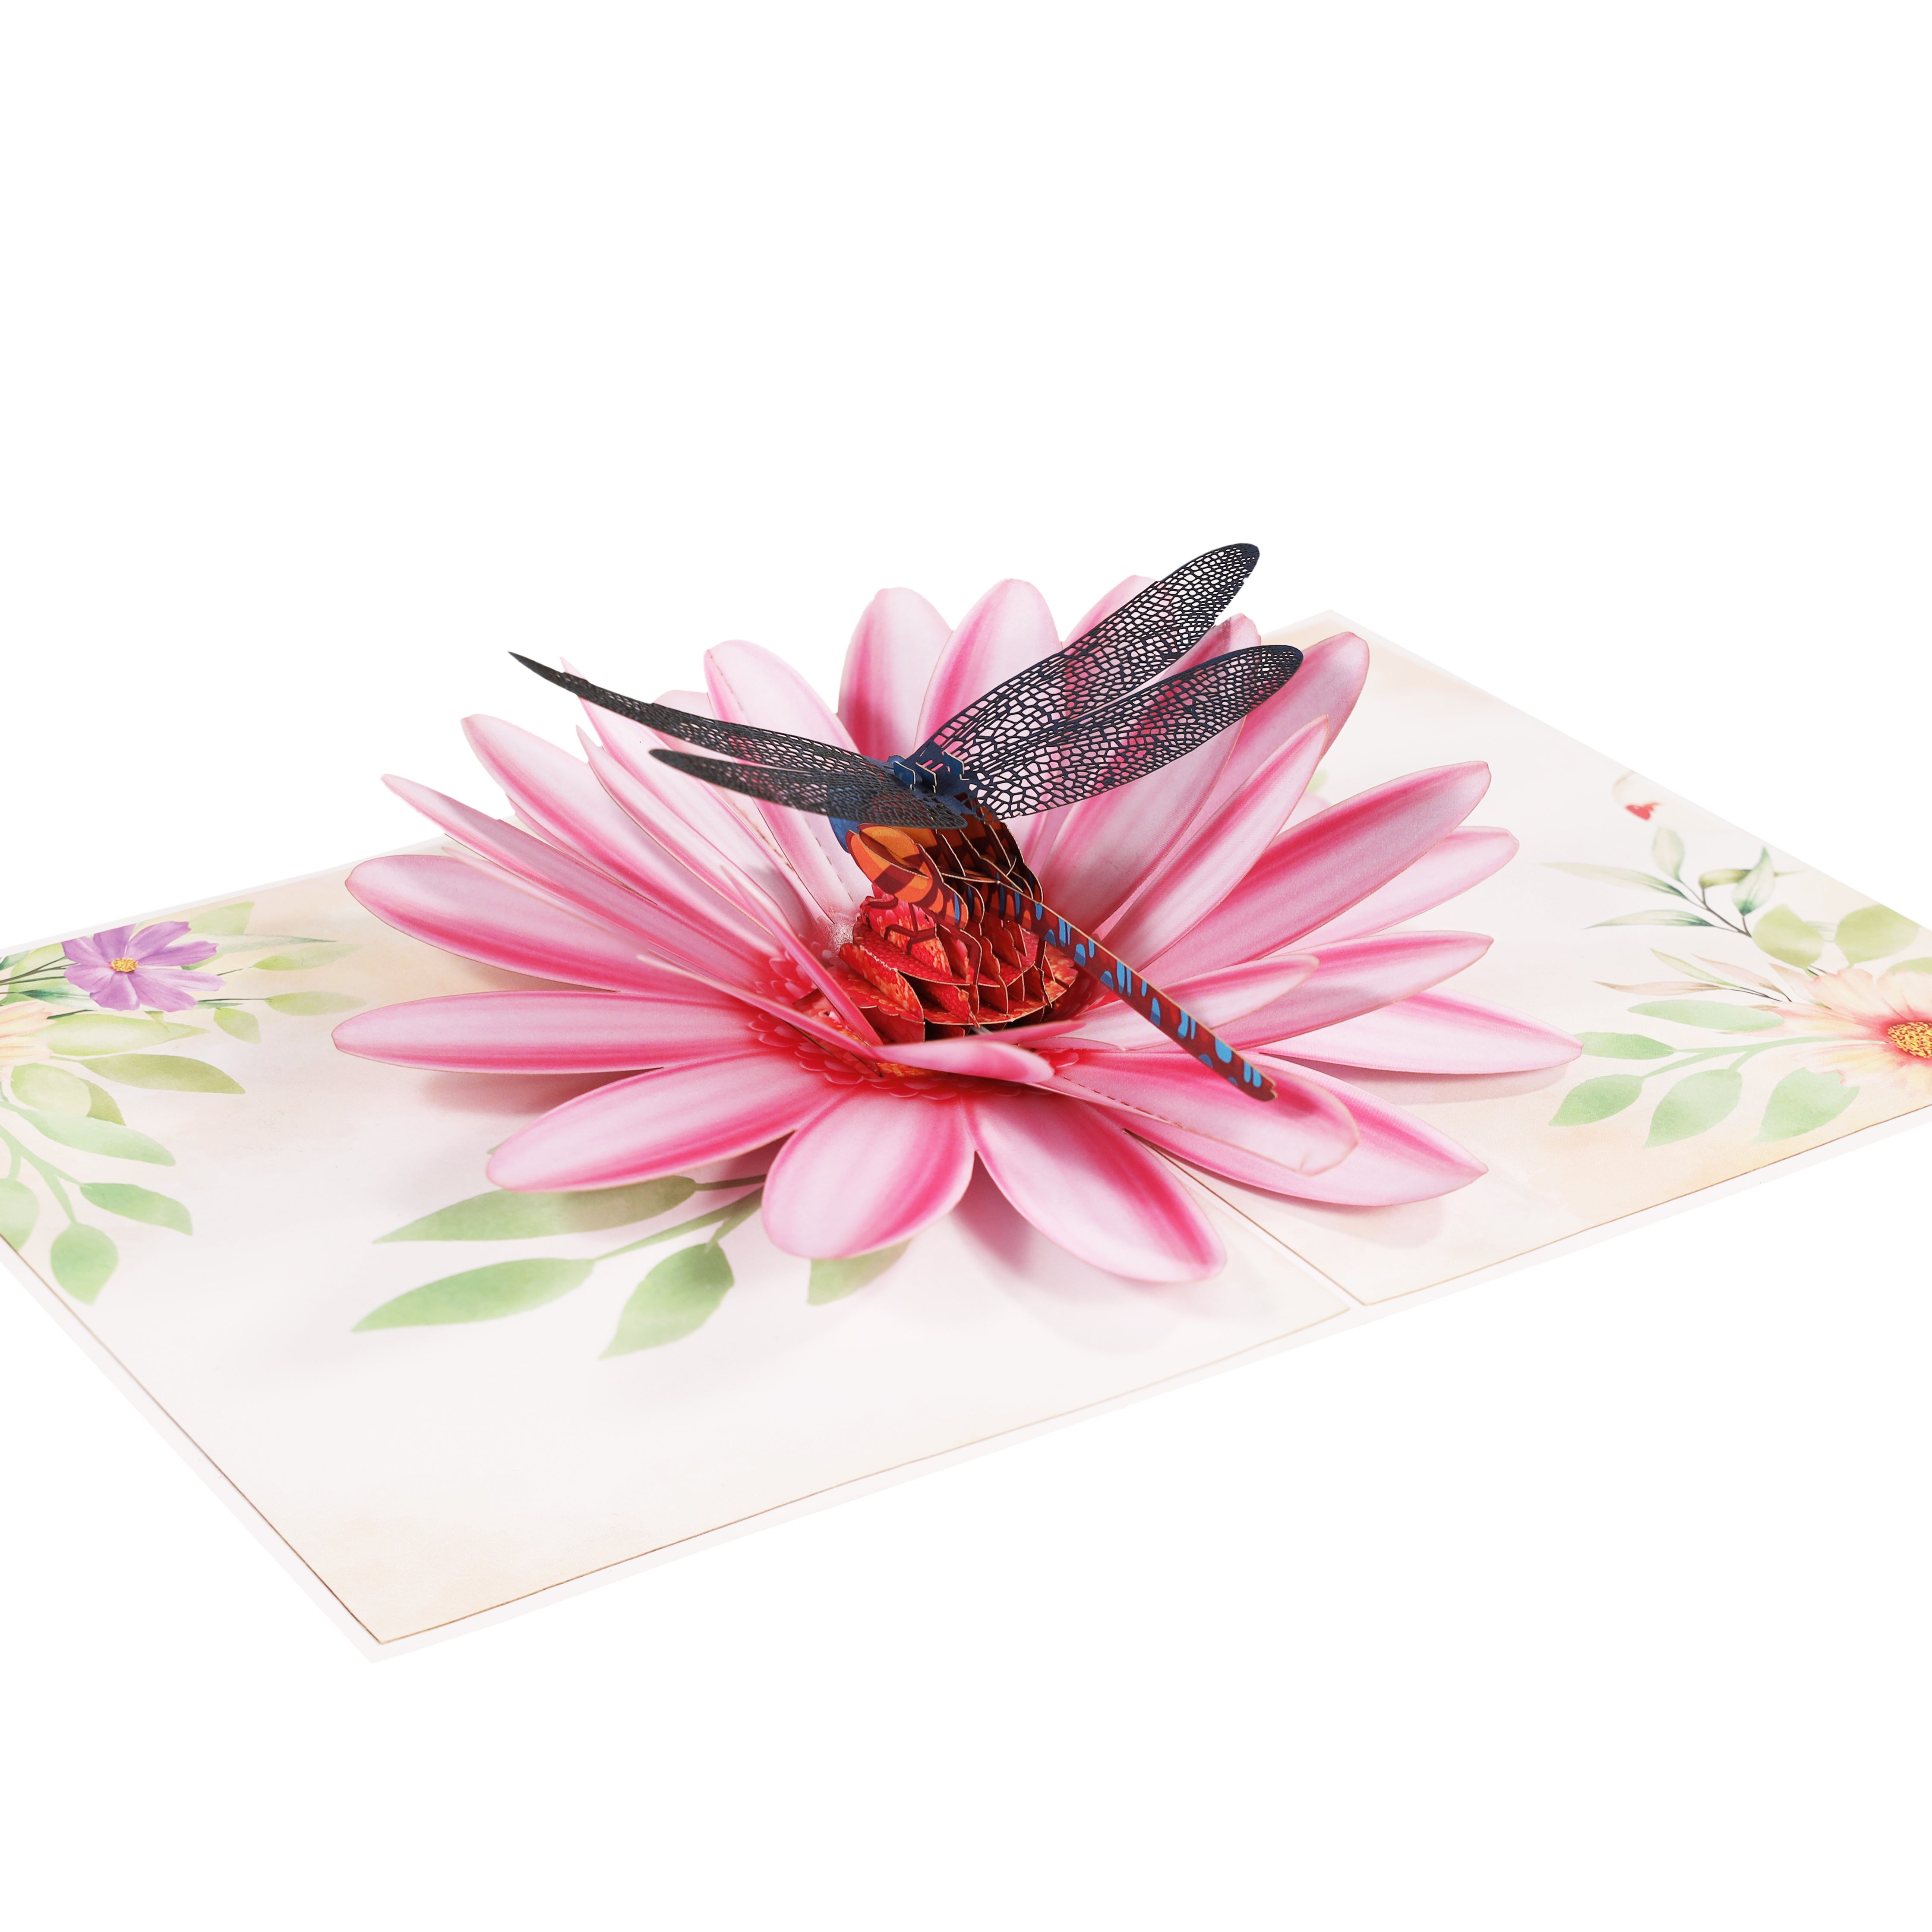 Dragonfly and water lily 3D pop-up card for Birthdays and Mother's Day